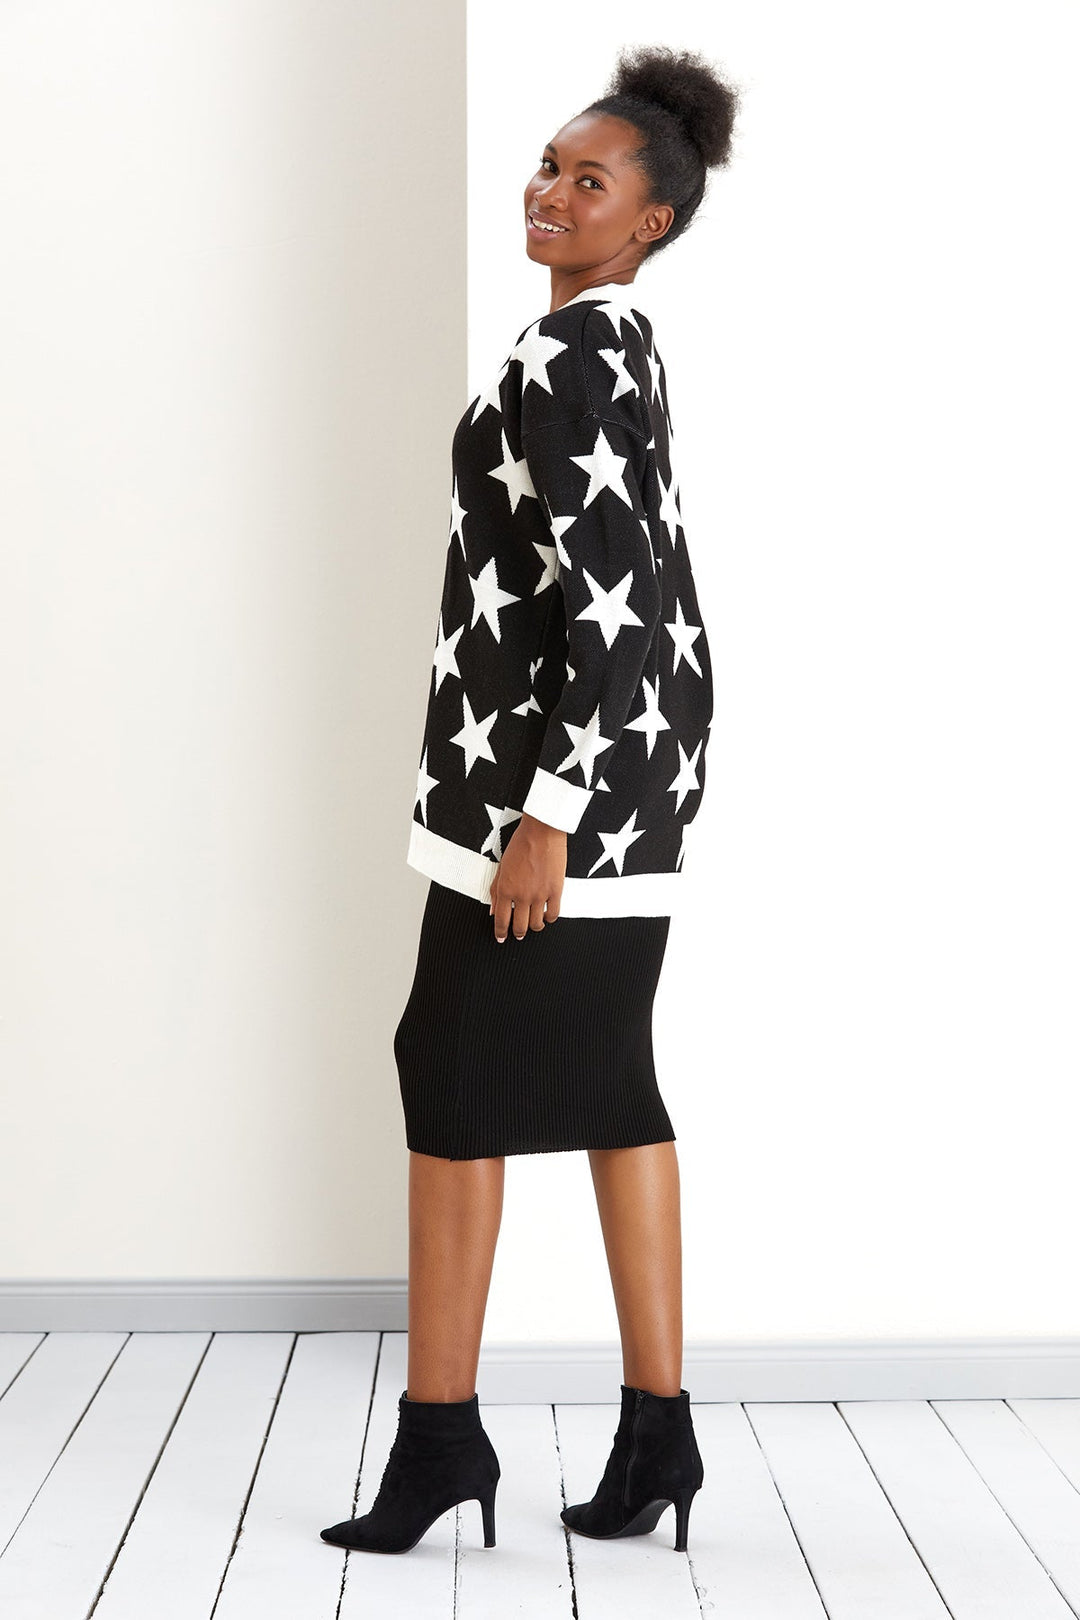 Star Knitted Co Ord set in Black/White: Midi Dress with Cardigan (PRE-ORDER) - jqwholesale.com